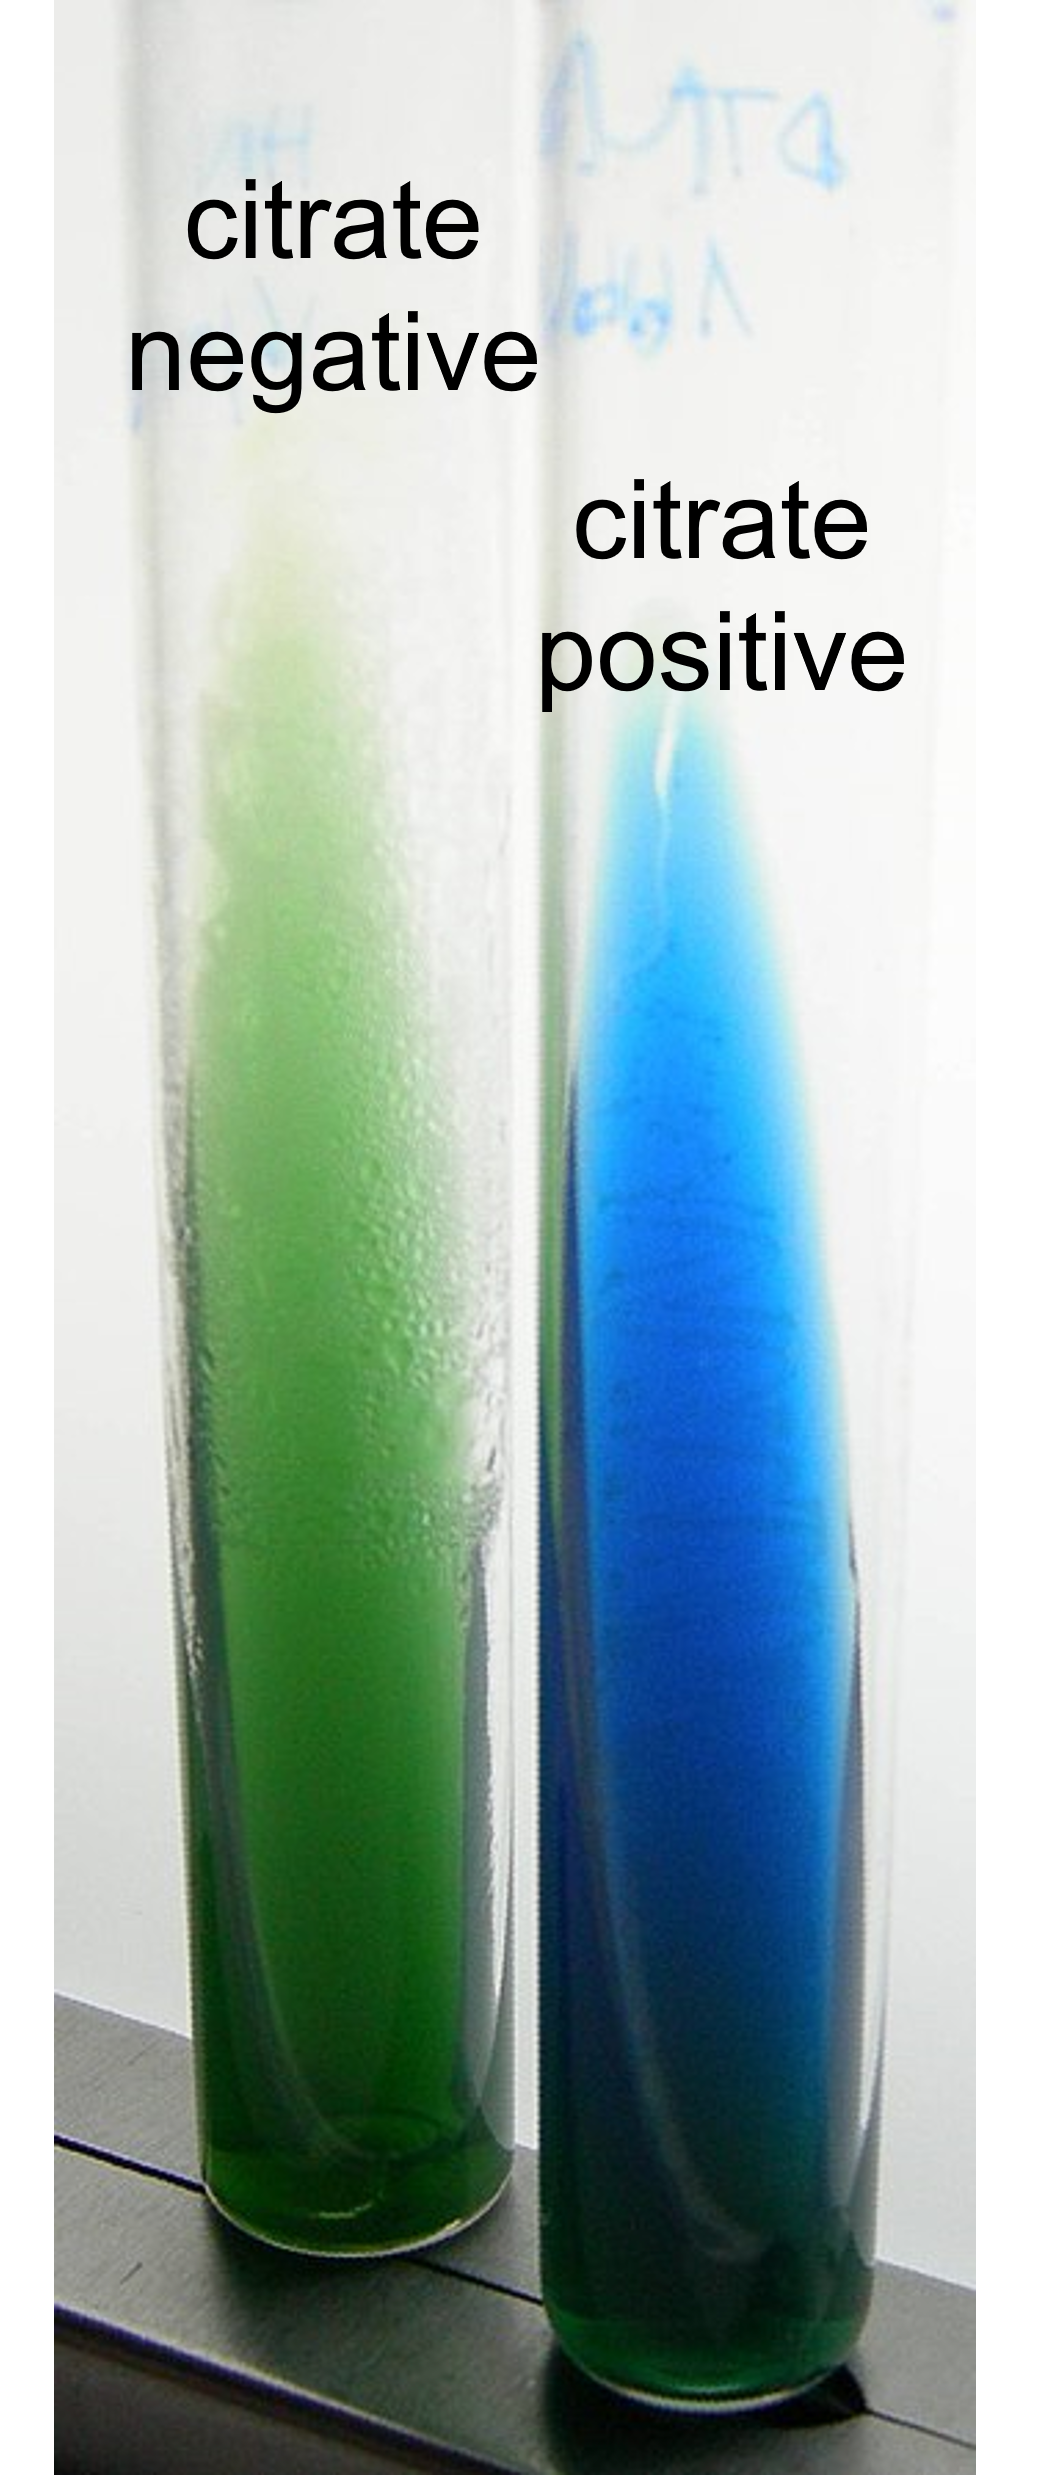 citrate negative medium remains green; citrate positive medium appears blue